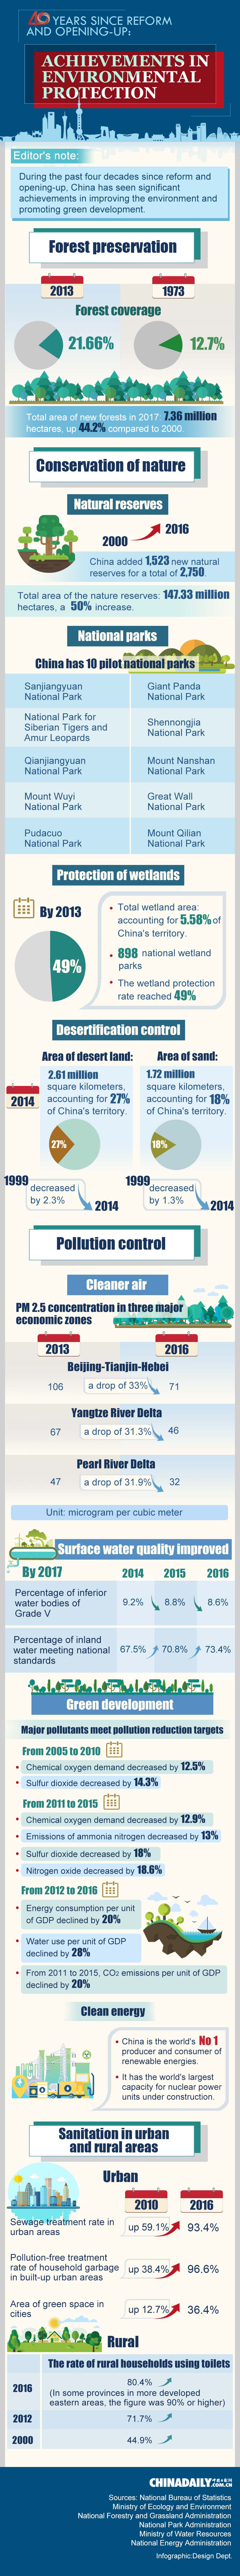 40 Yrs Since Reform, Opening-up: Achievements in Environmental Protection